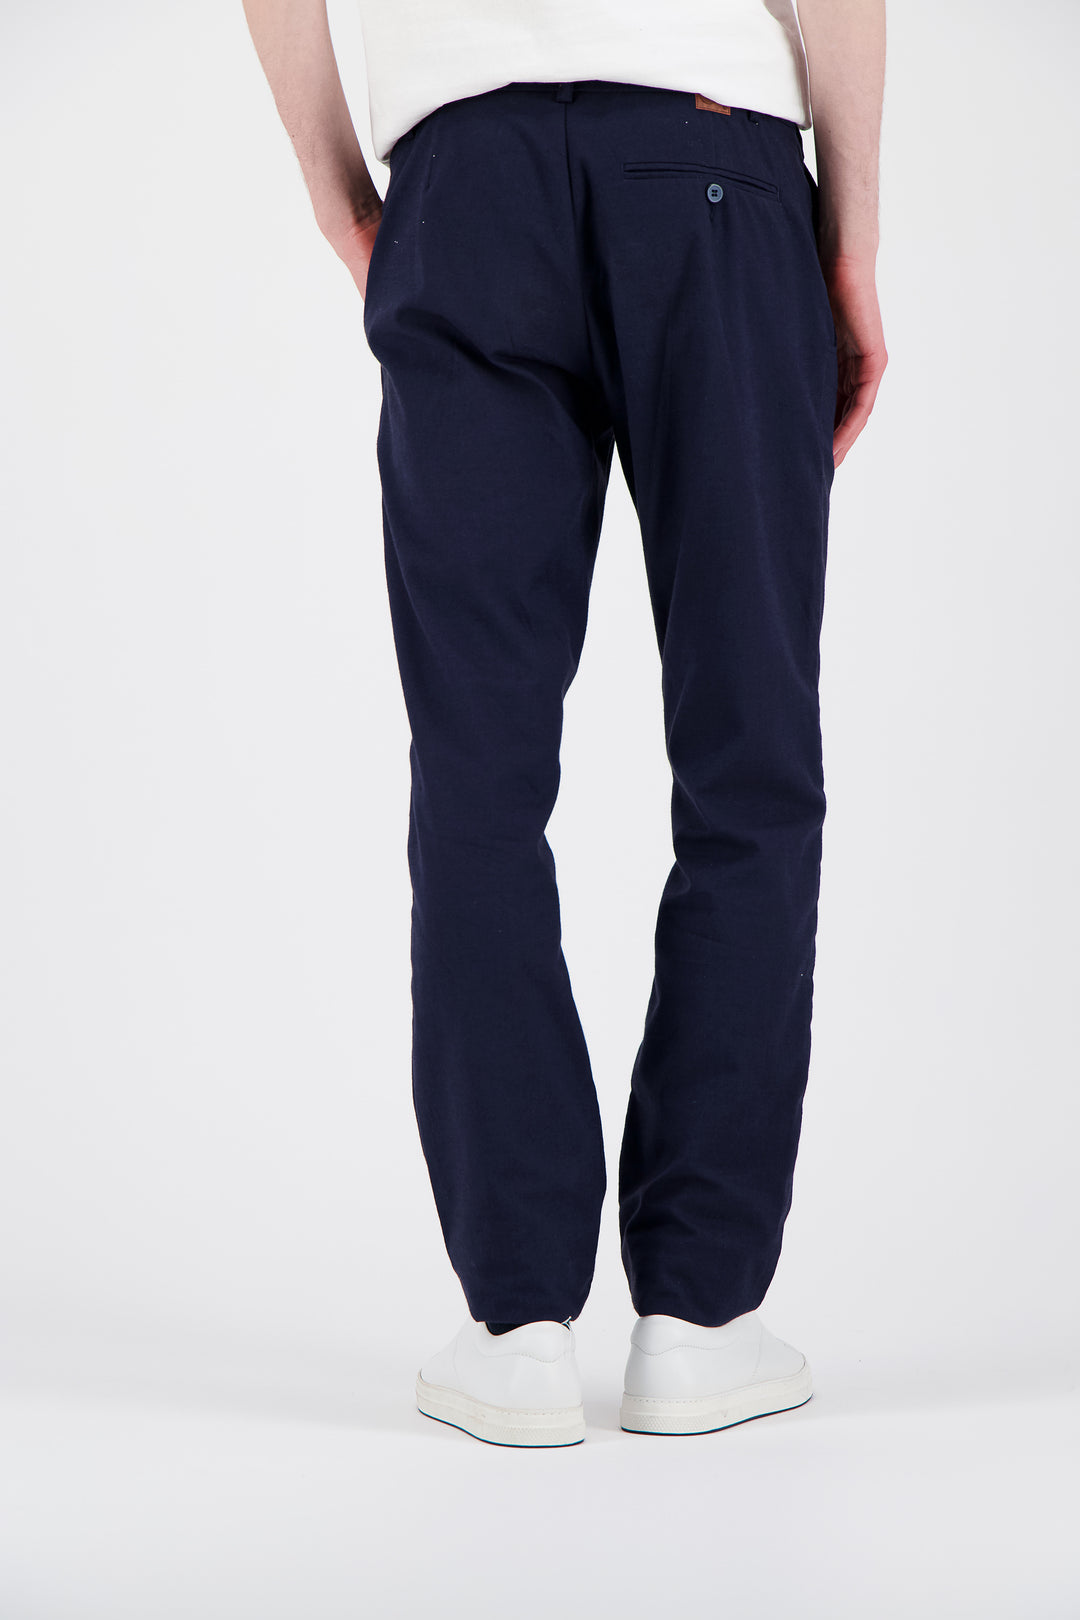 Blue city pant with darts